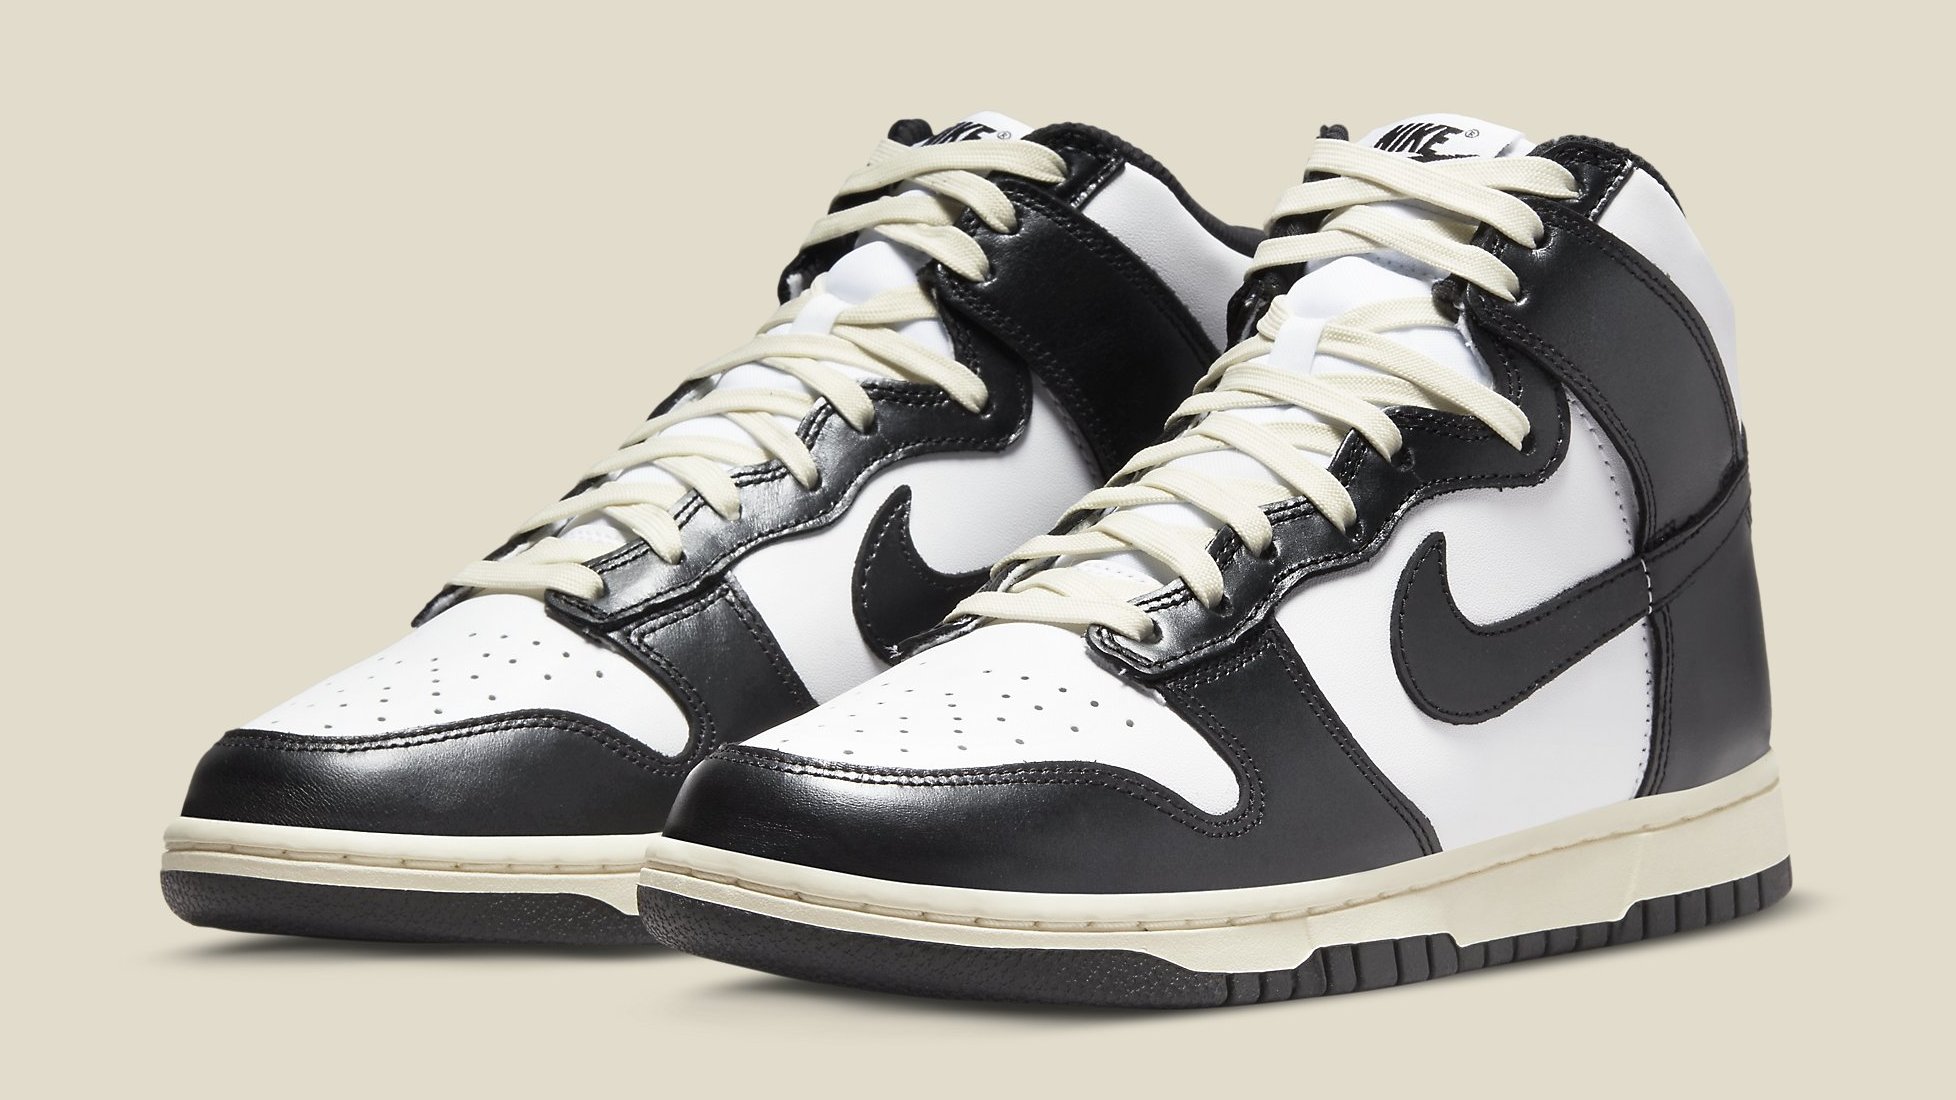 Señor persona septiembre Nike Dunk High Women's 'Vintage Black' Release Date DQ8581-100​​​​​​​ |  Sole Collector